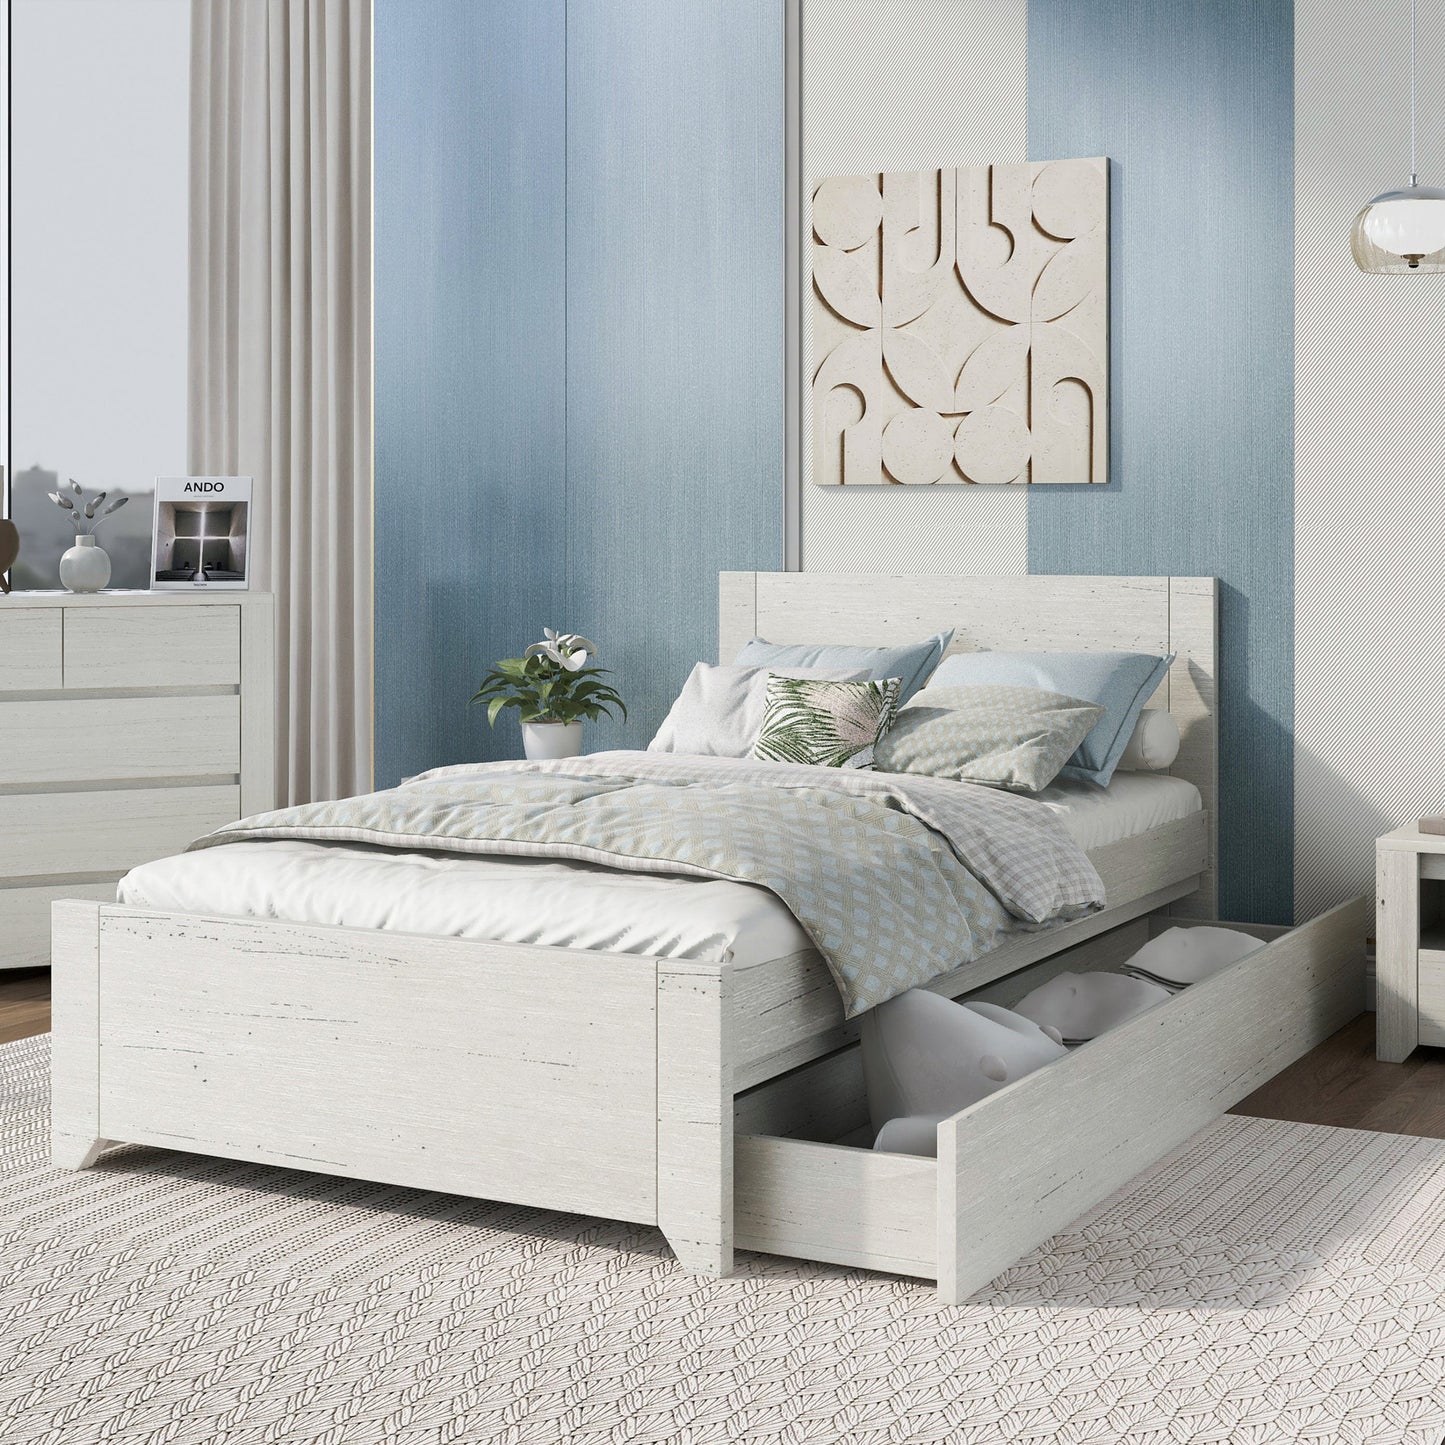 3 Pieces Off White Simple Style Manufacture Wood Bedroom Sets with Twin bed, Nightstand and Chest